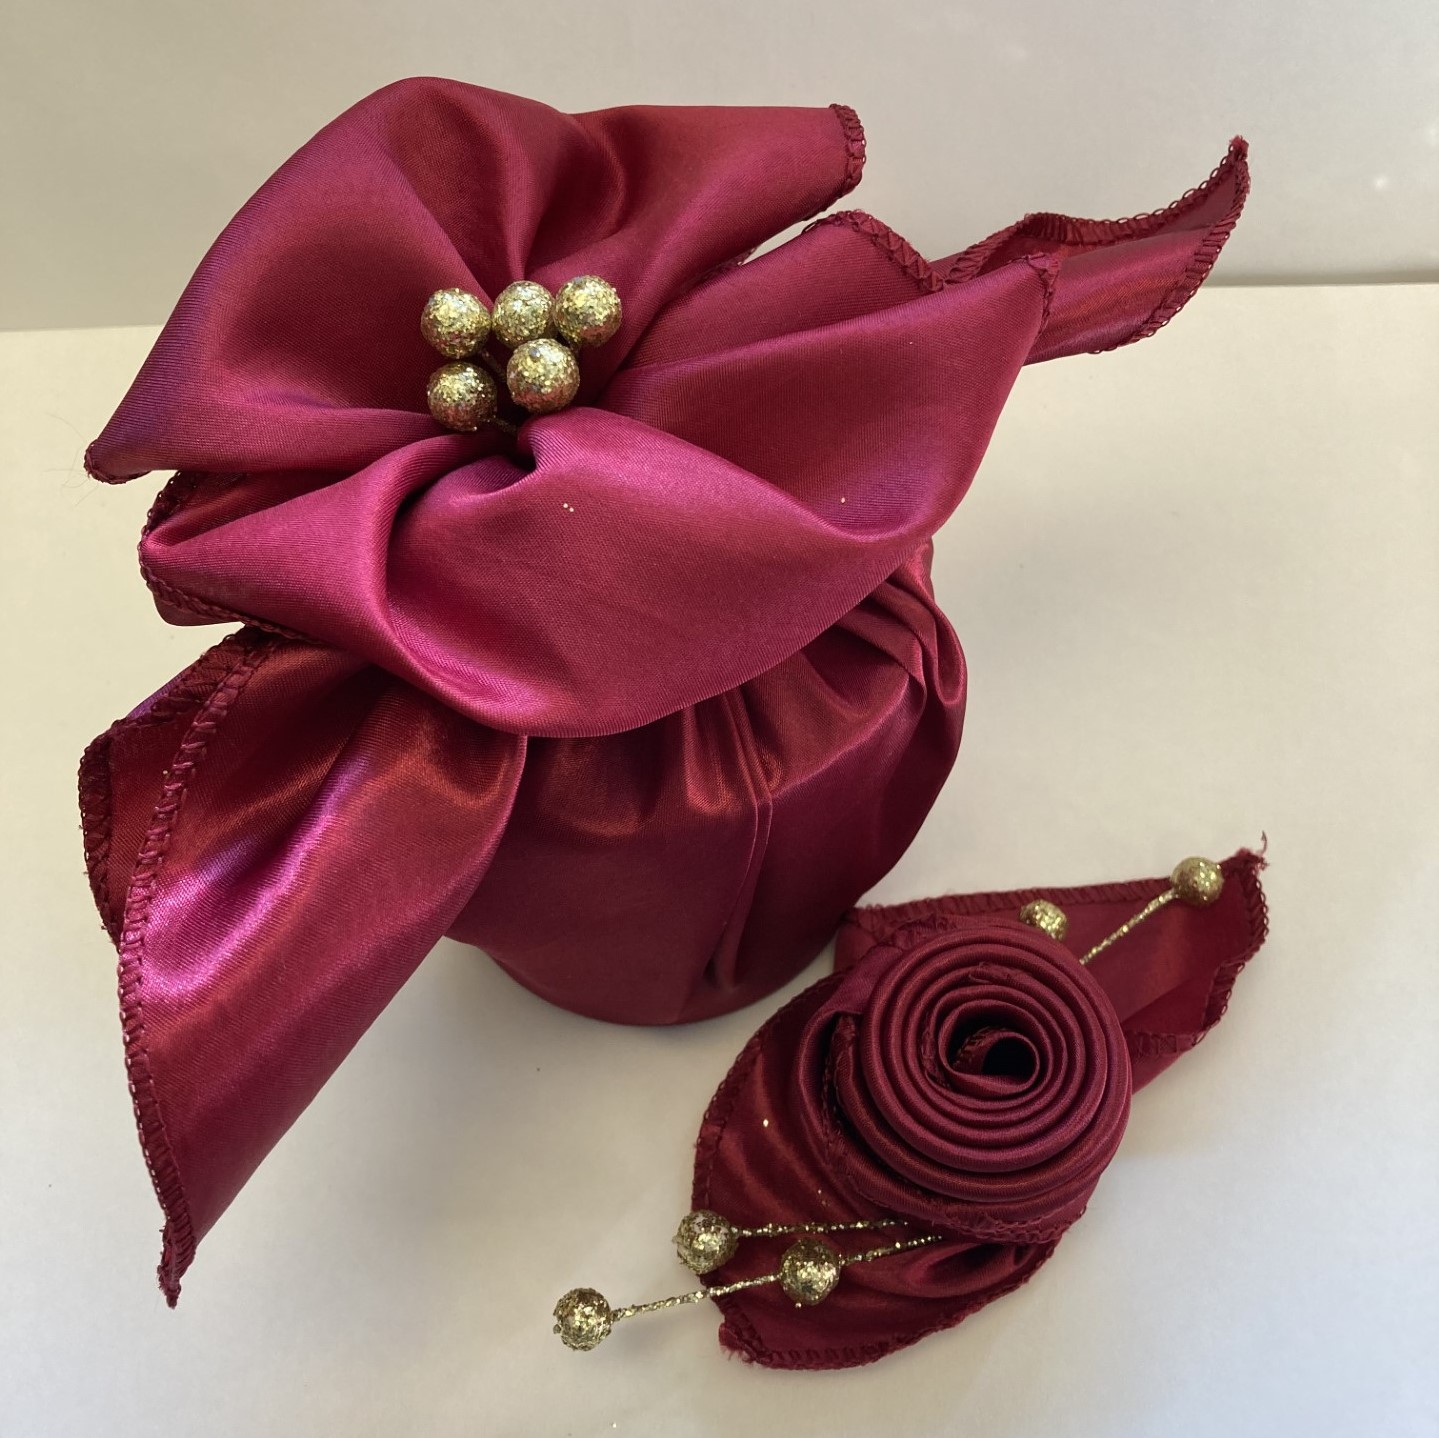 Fabric wrapped gift and rosette folded napkin